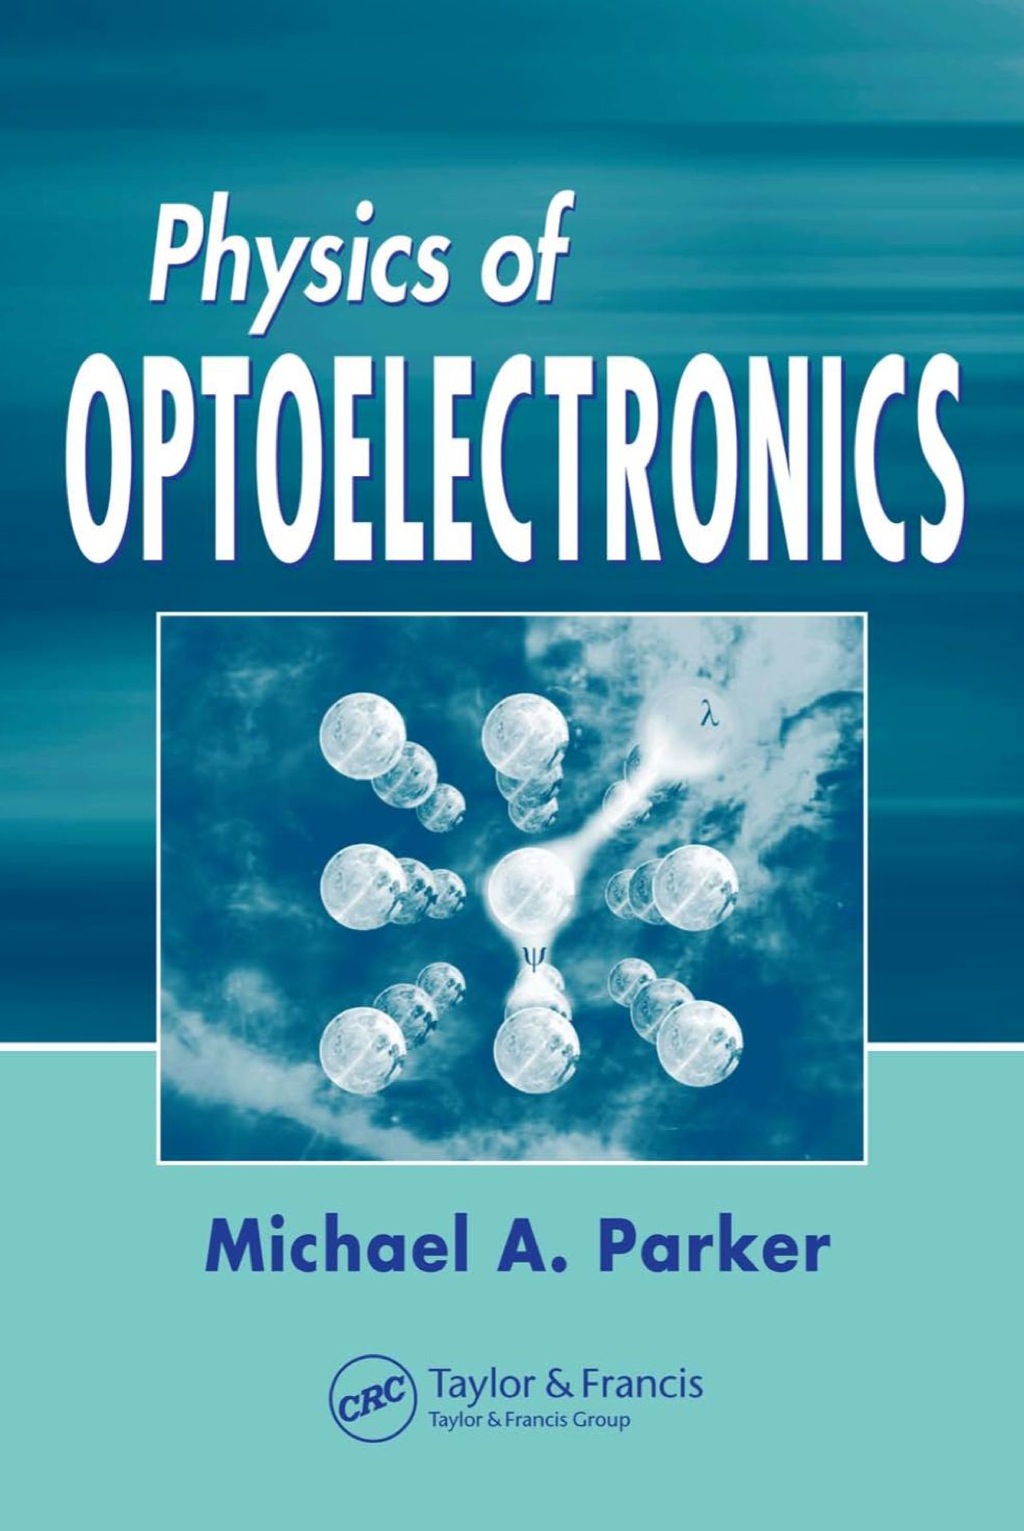 Physics of Optoelectronics (eBook) - Michael A. Parker